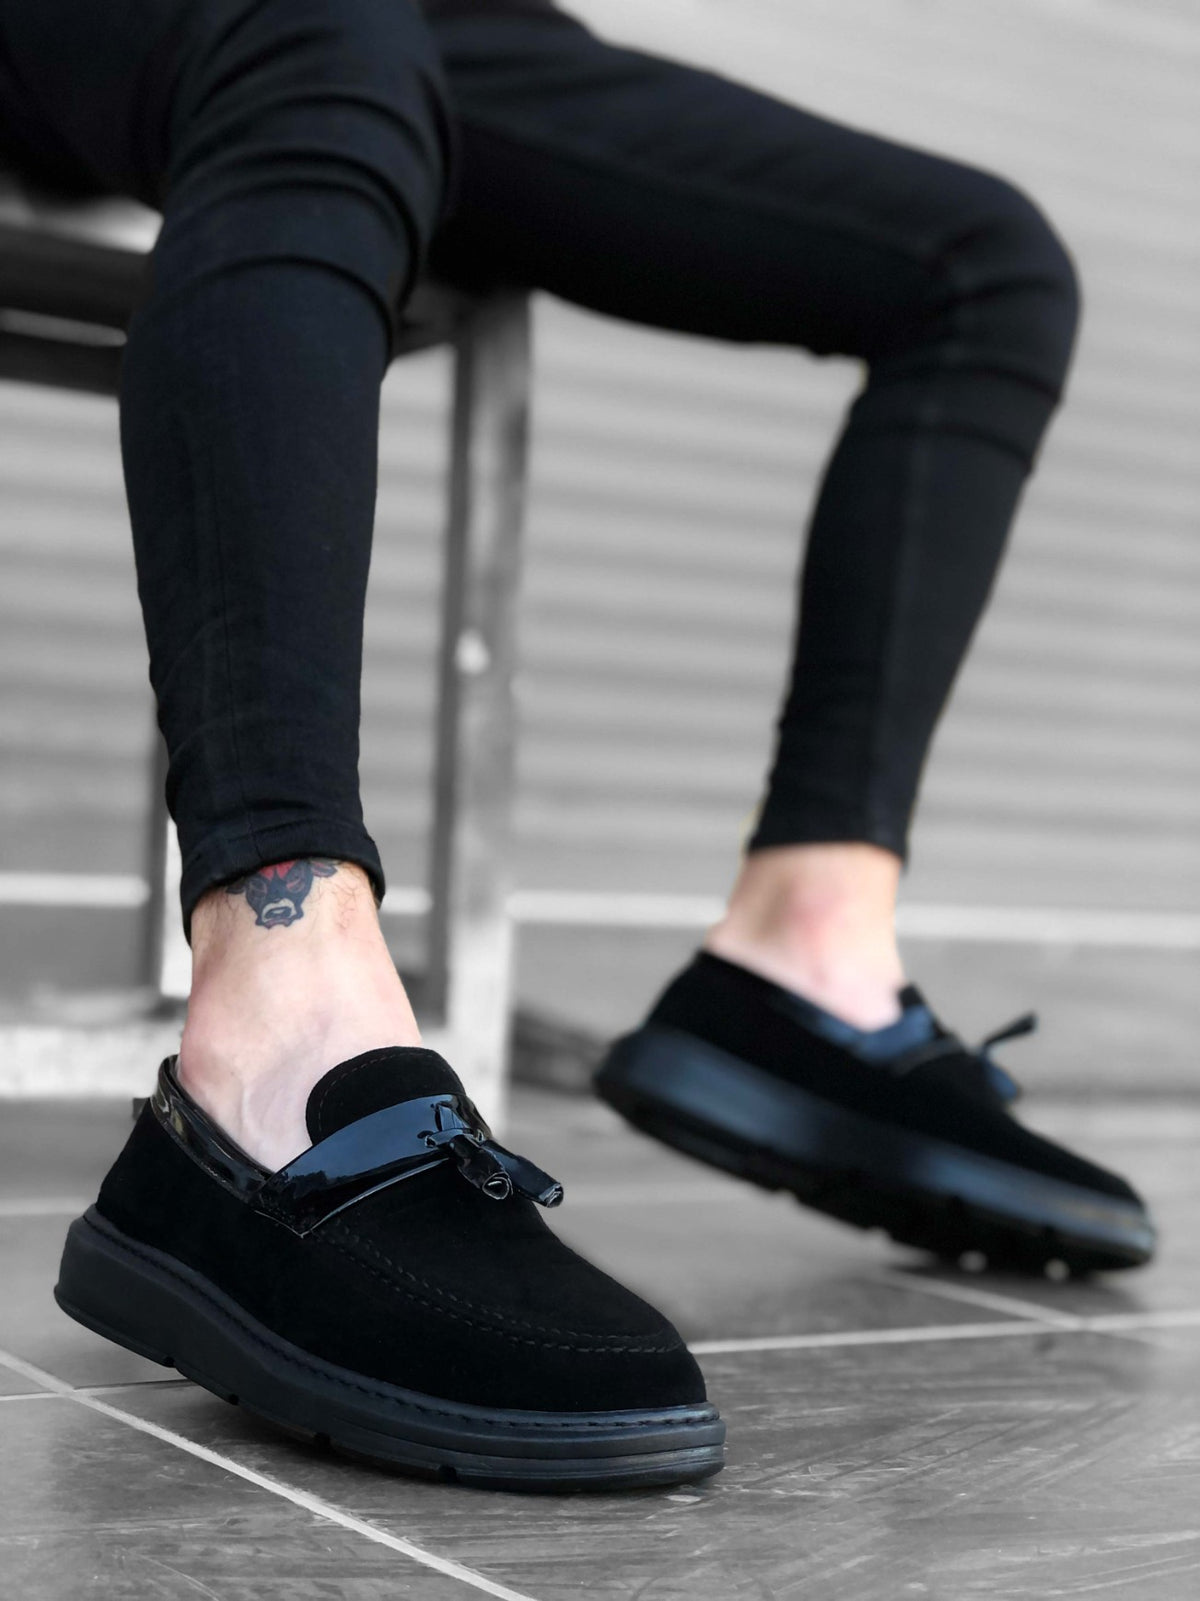 BA0005 Laceless High Sole Classic Black Suede Shiny Belted Tasseled Men's Shoes - STREETMODE ™